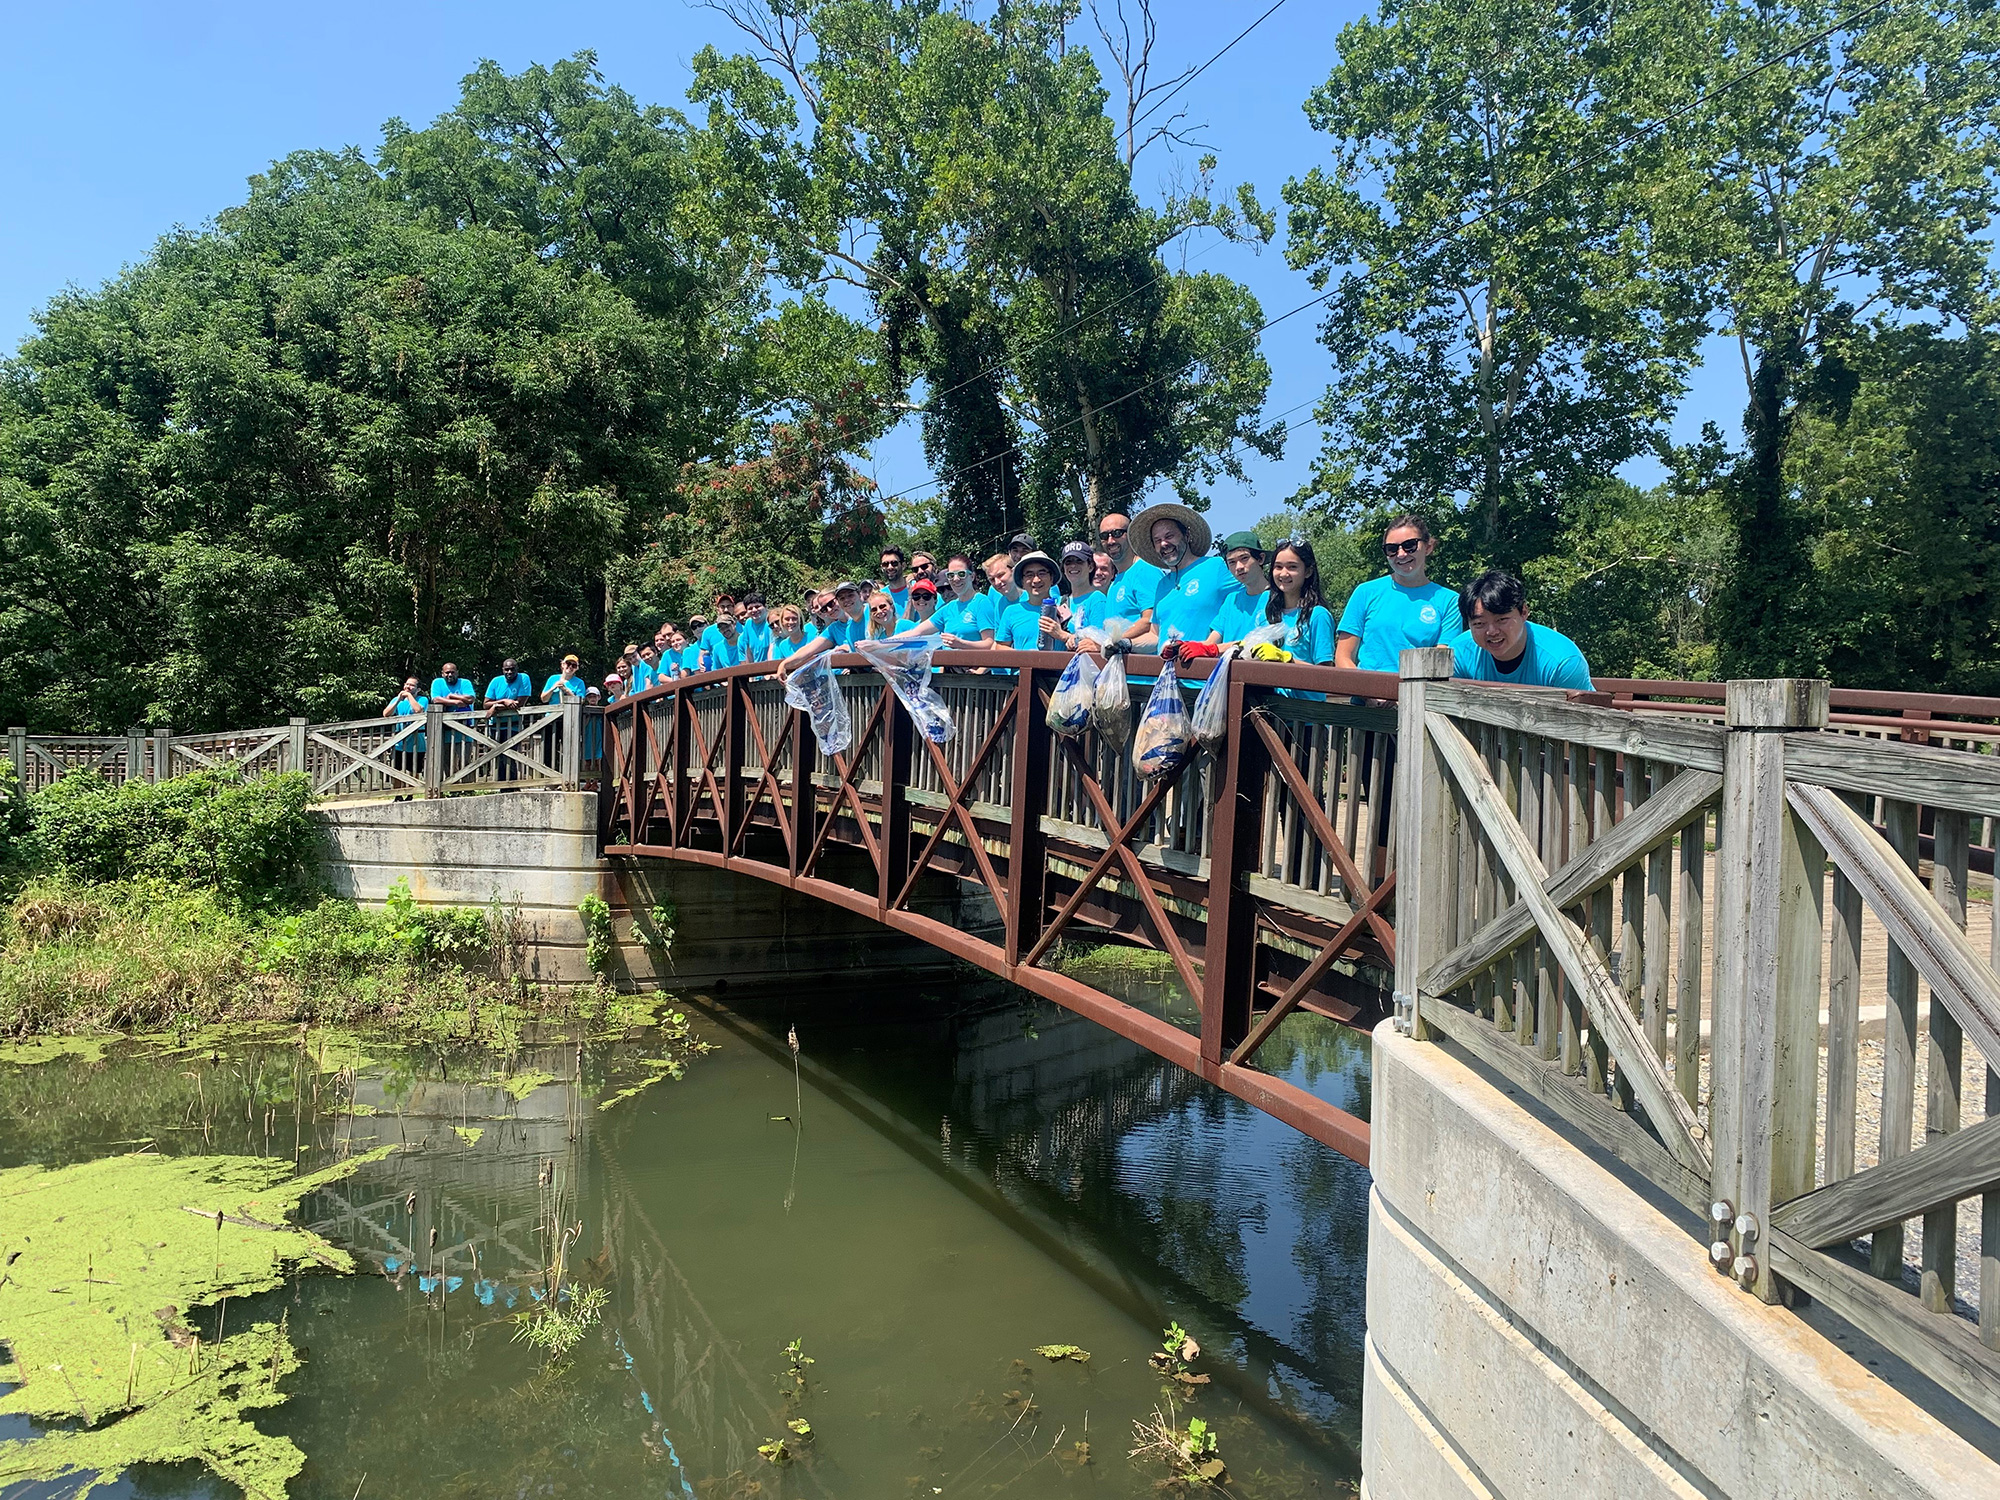 Associates from Cherry Bekaert's Washington, DC practice removed 960 pounds of trash along the Potomac River with the Potomac Conservancy.